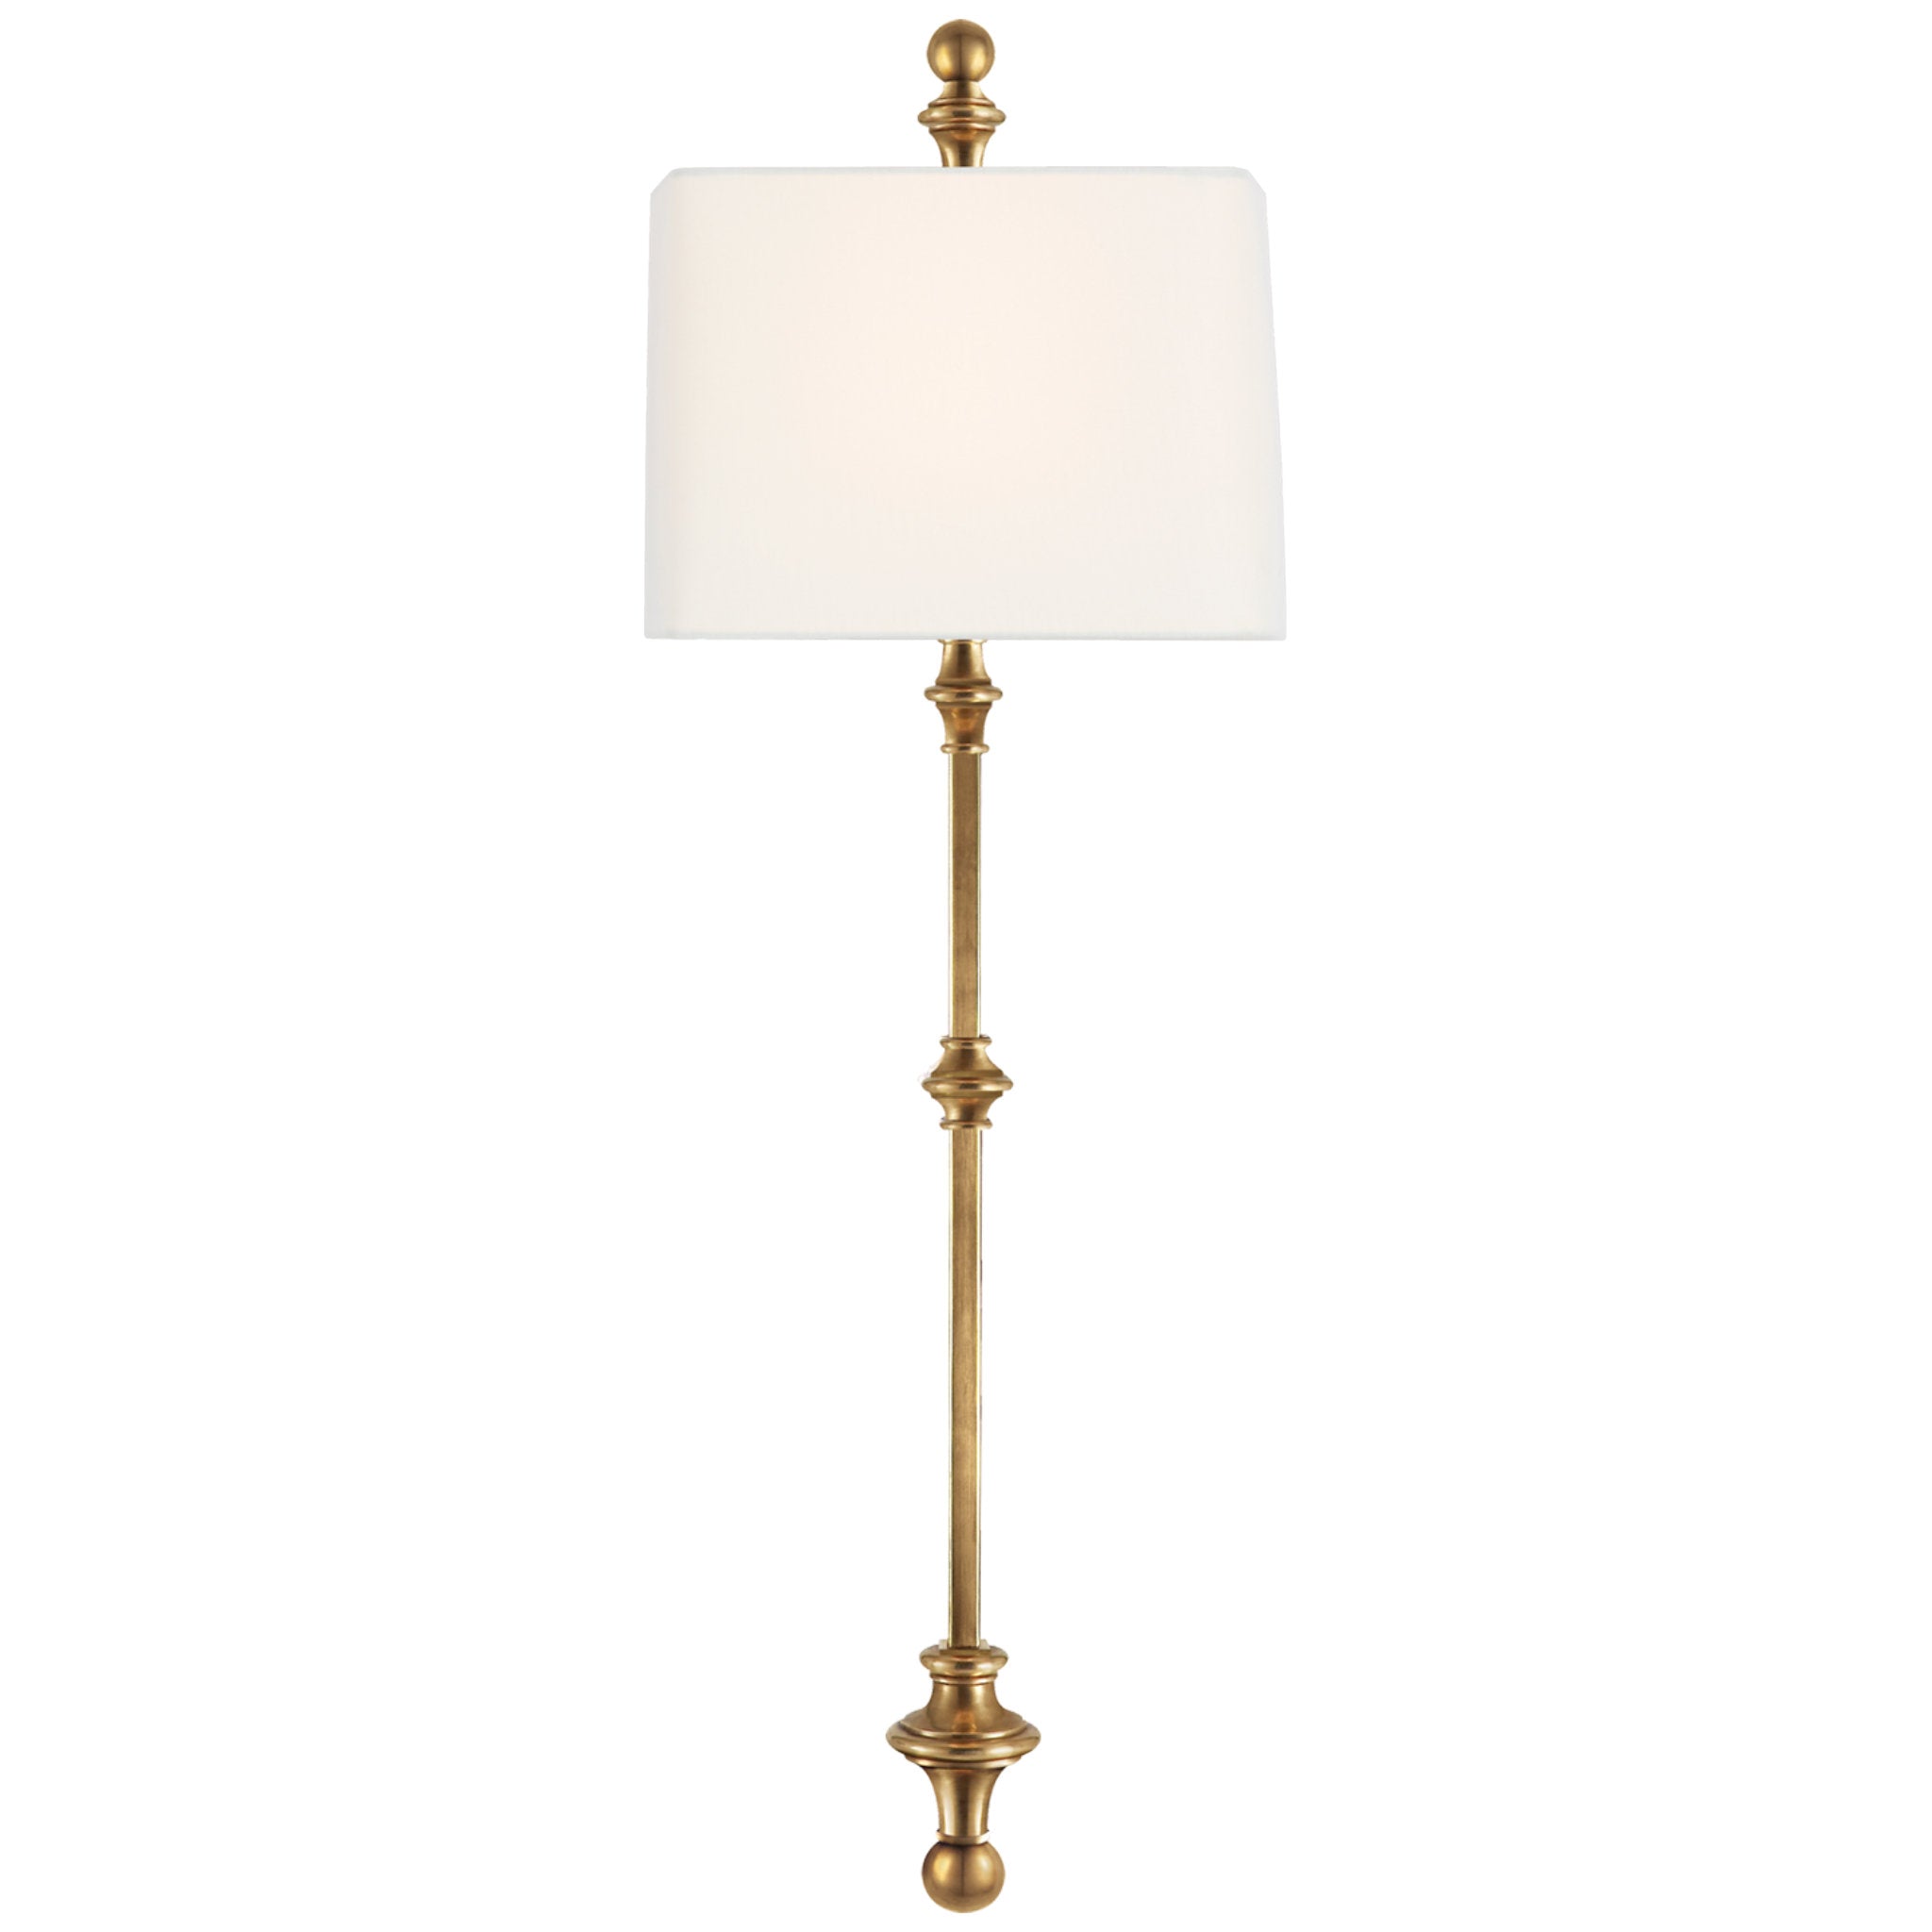 Chapman & Myers Cawdor Stanchion Wall Light in Antique-Burnished Brass with Linen Shade